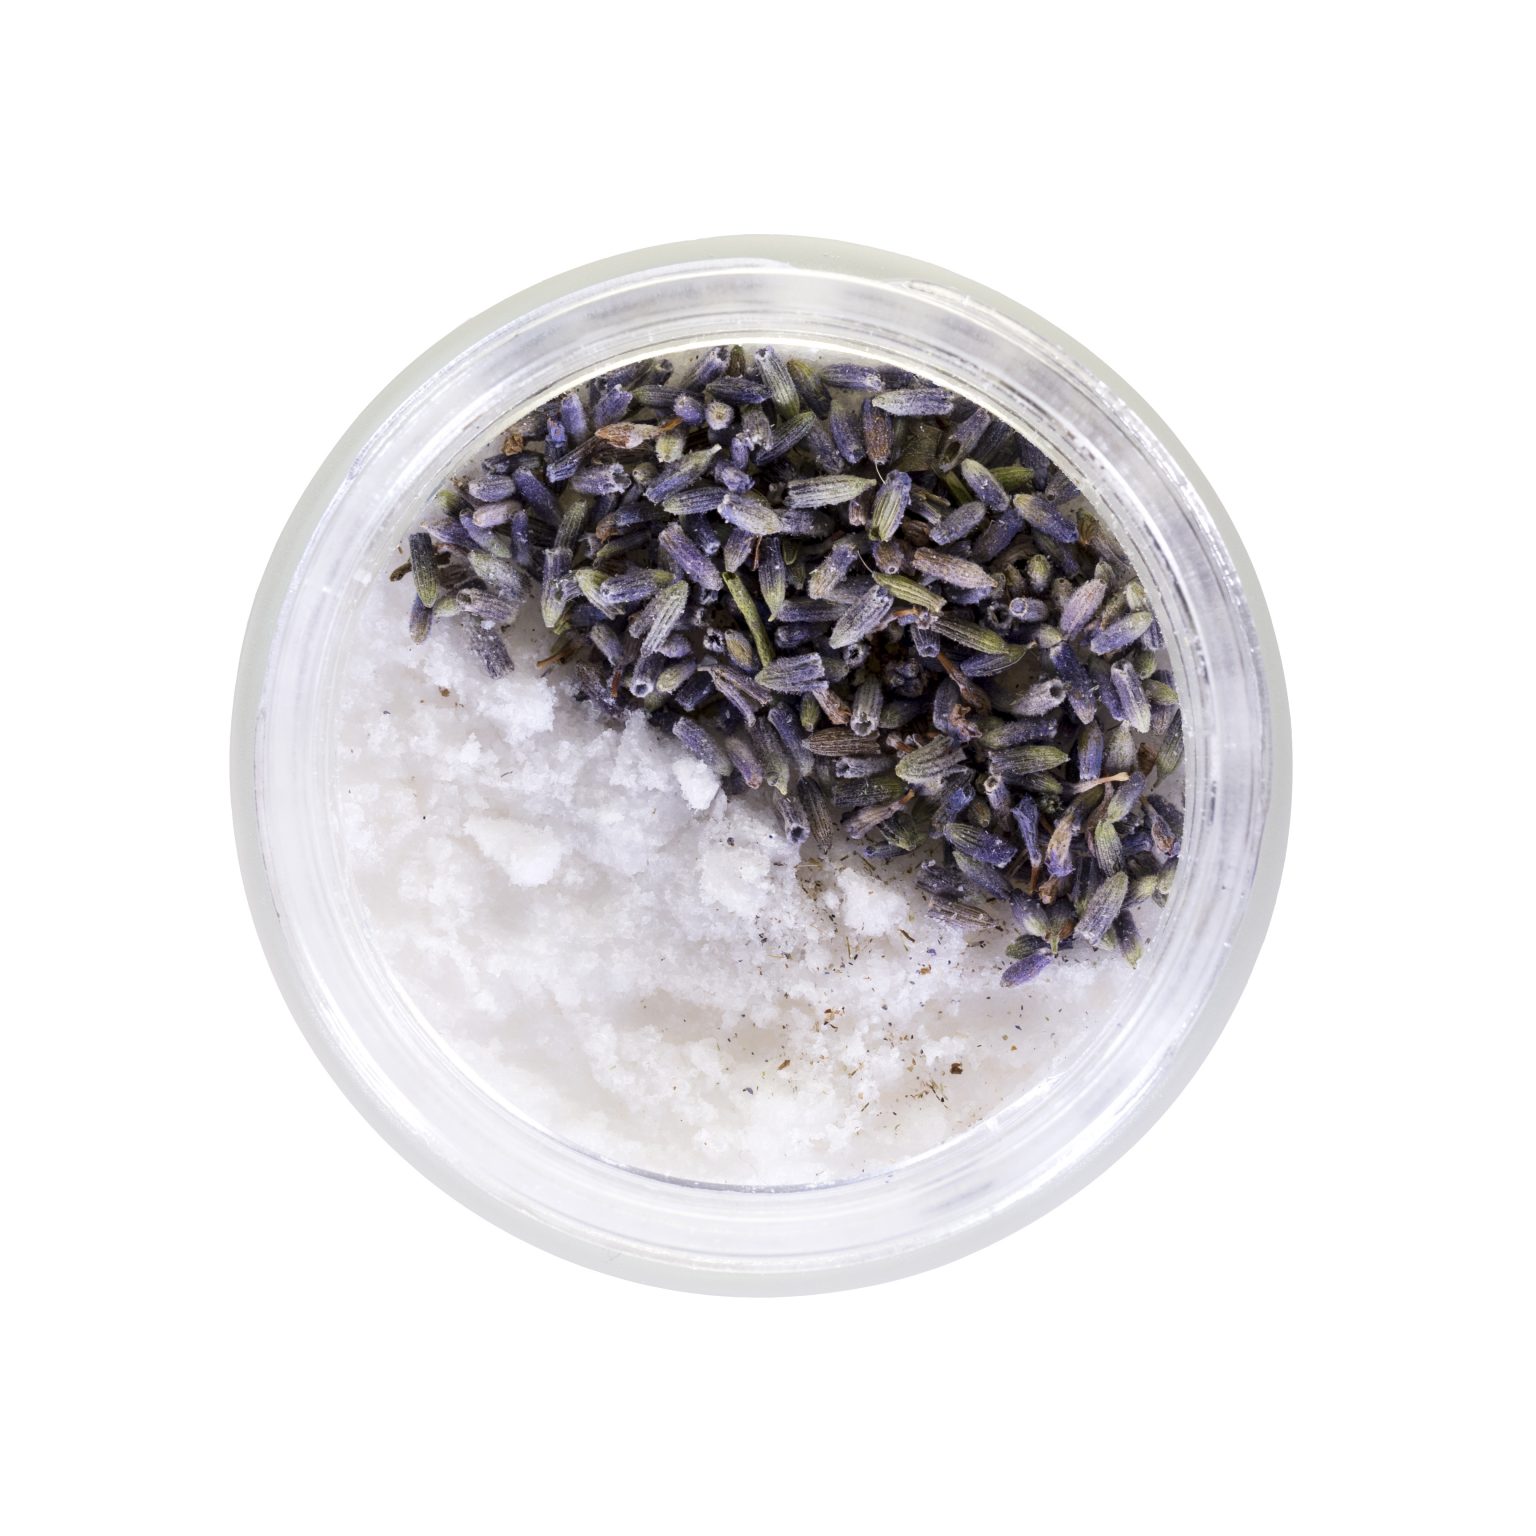 Herbal Bath Infusion | Makes Scents Natural Spa Line